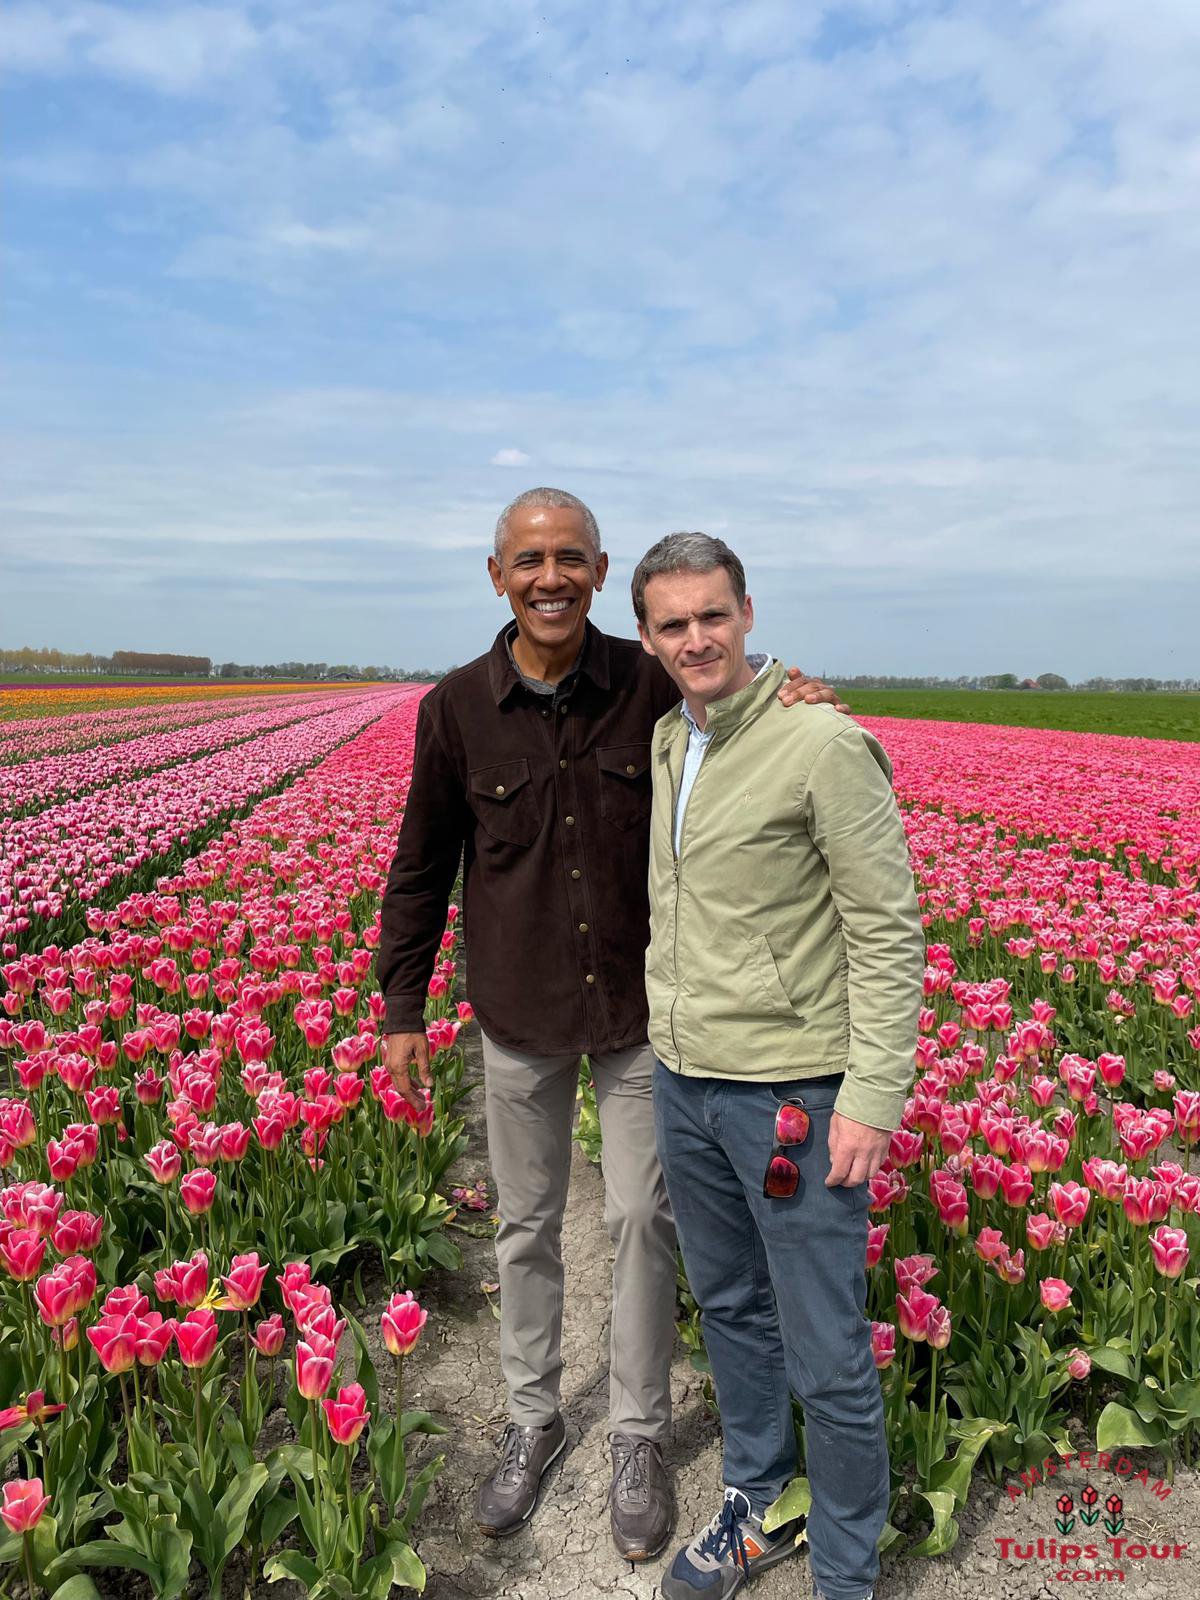 Amsterdam Tulips Tour: How one man with a vision went from niche tour operator to private tour guide for Barack Obama